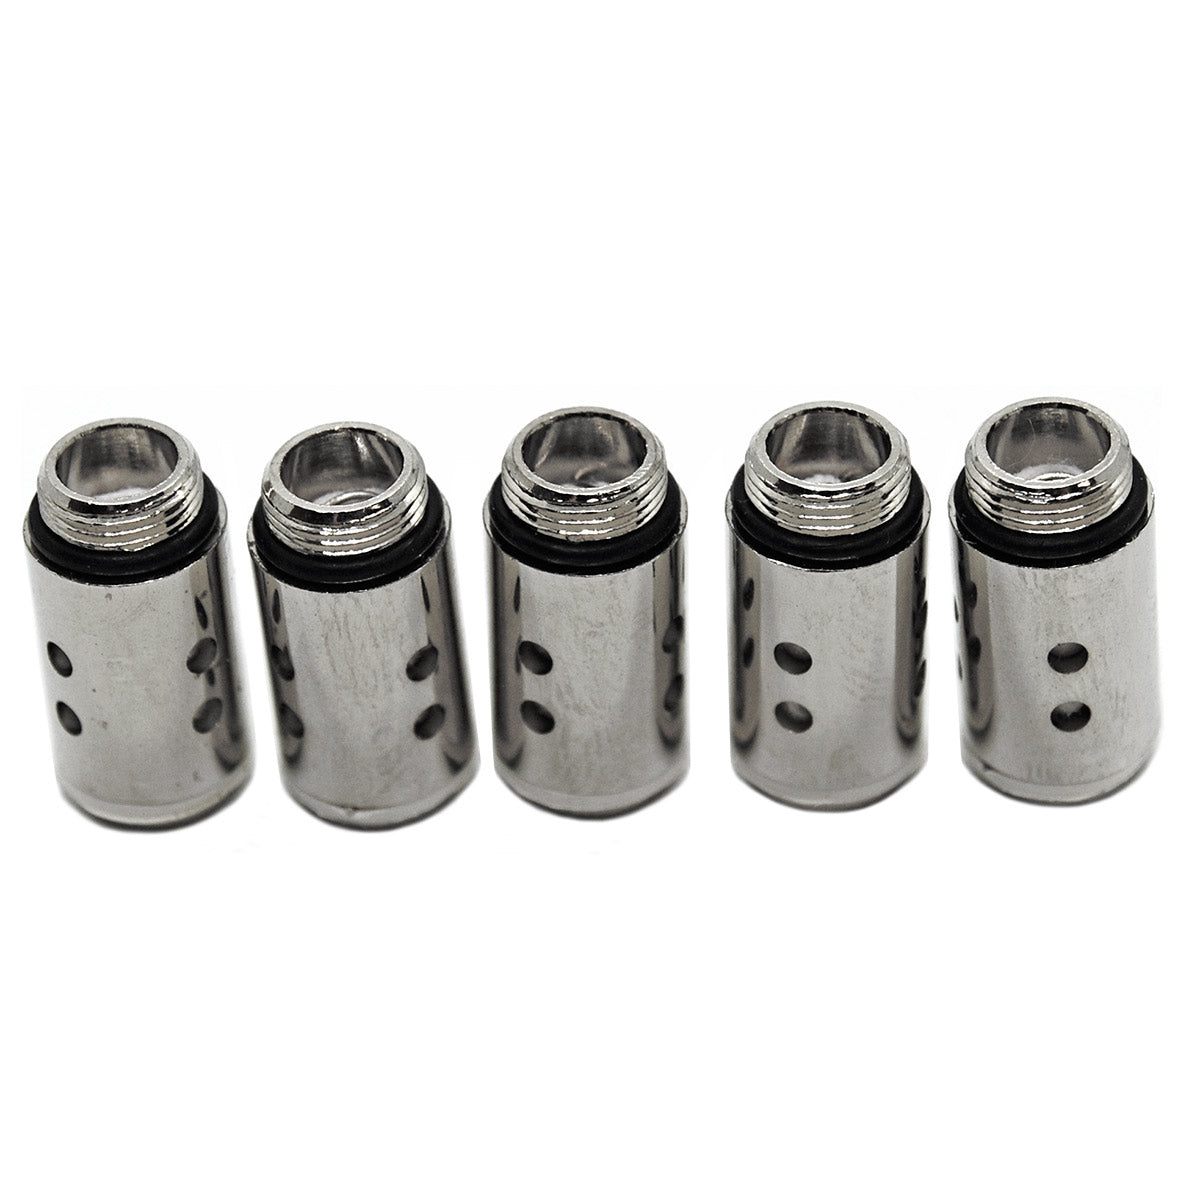 Ripper 2.0 Replacement Coils 5pk